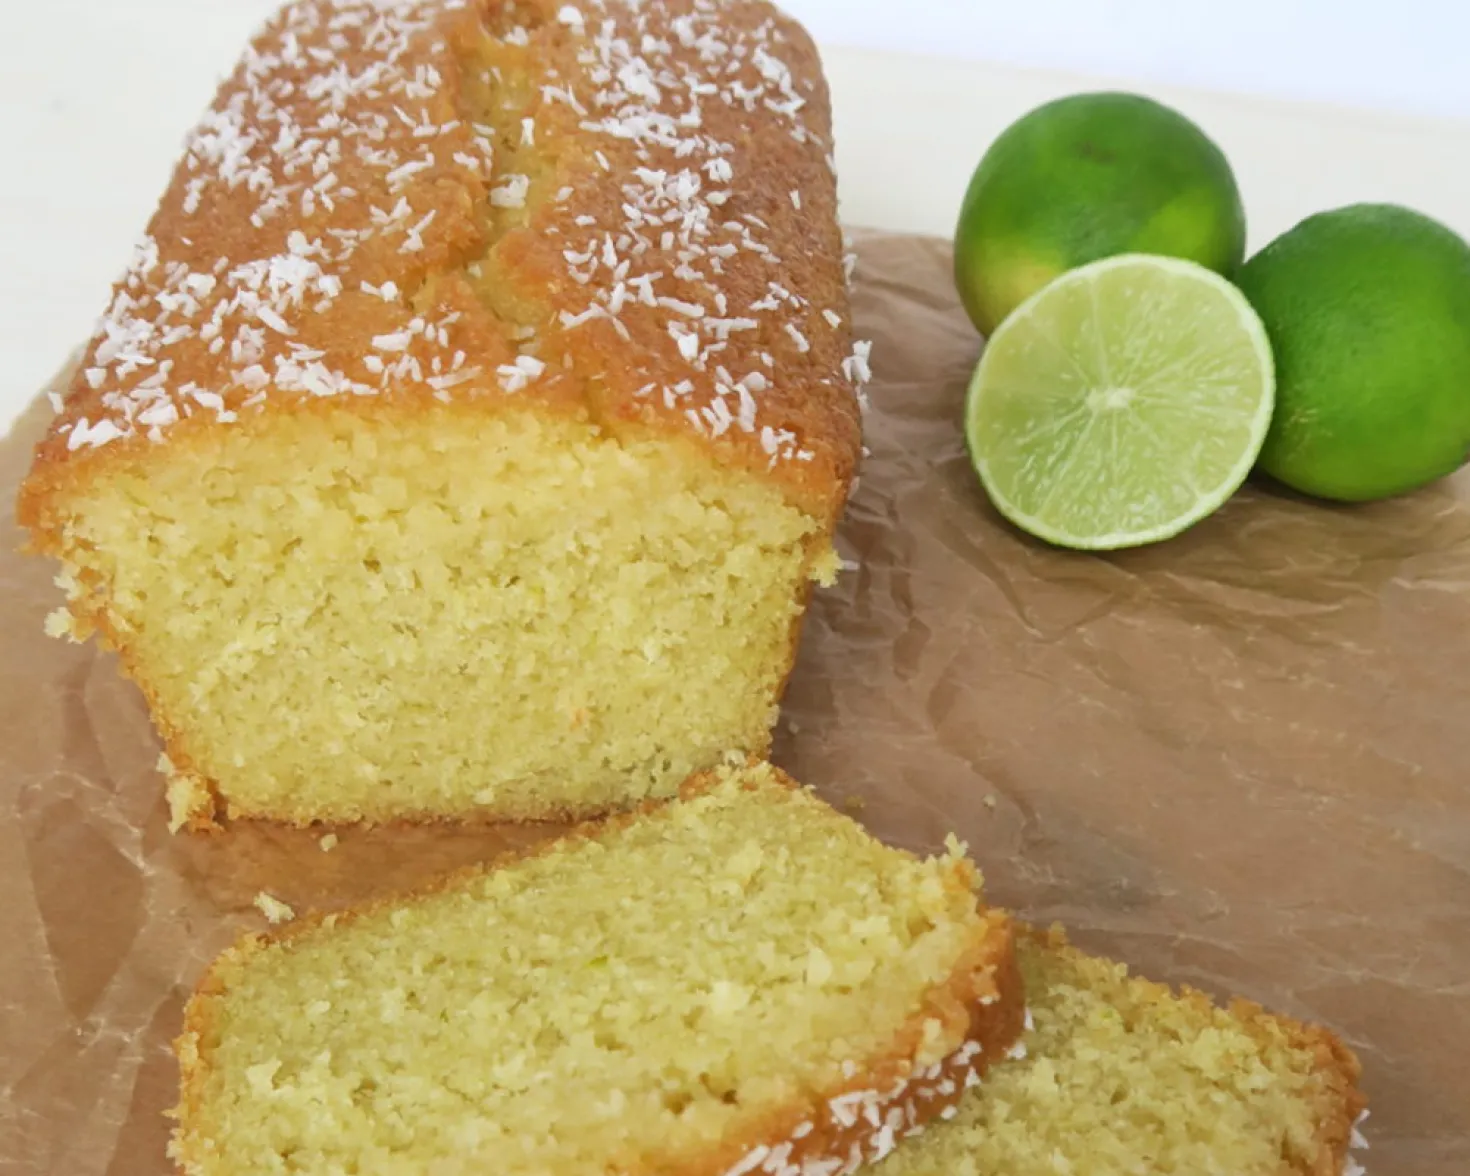 Lime and Coconut Loaf Cake  image